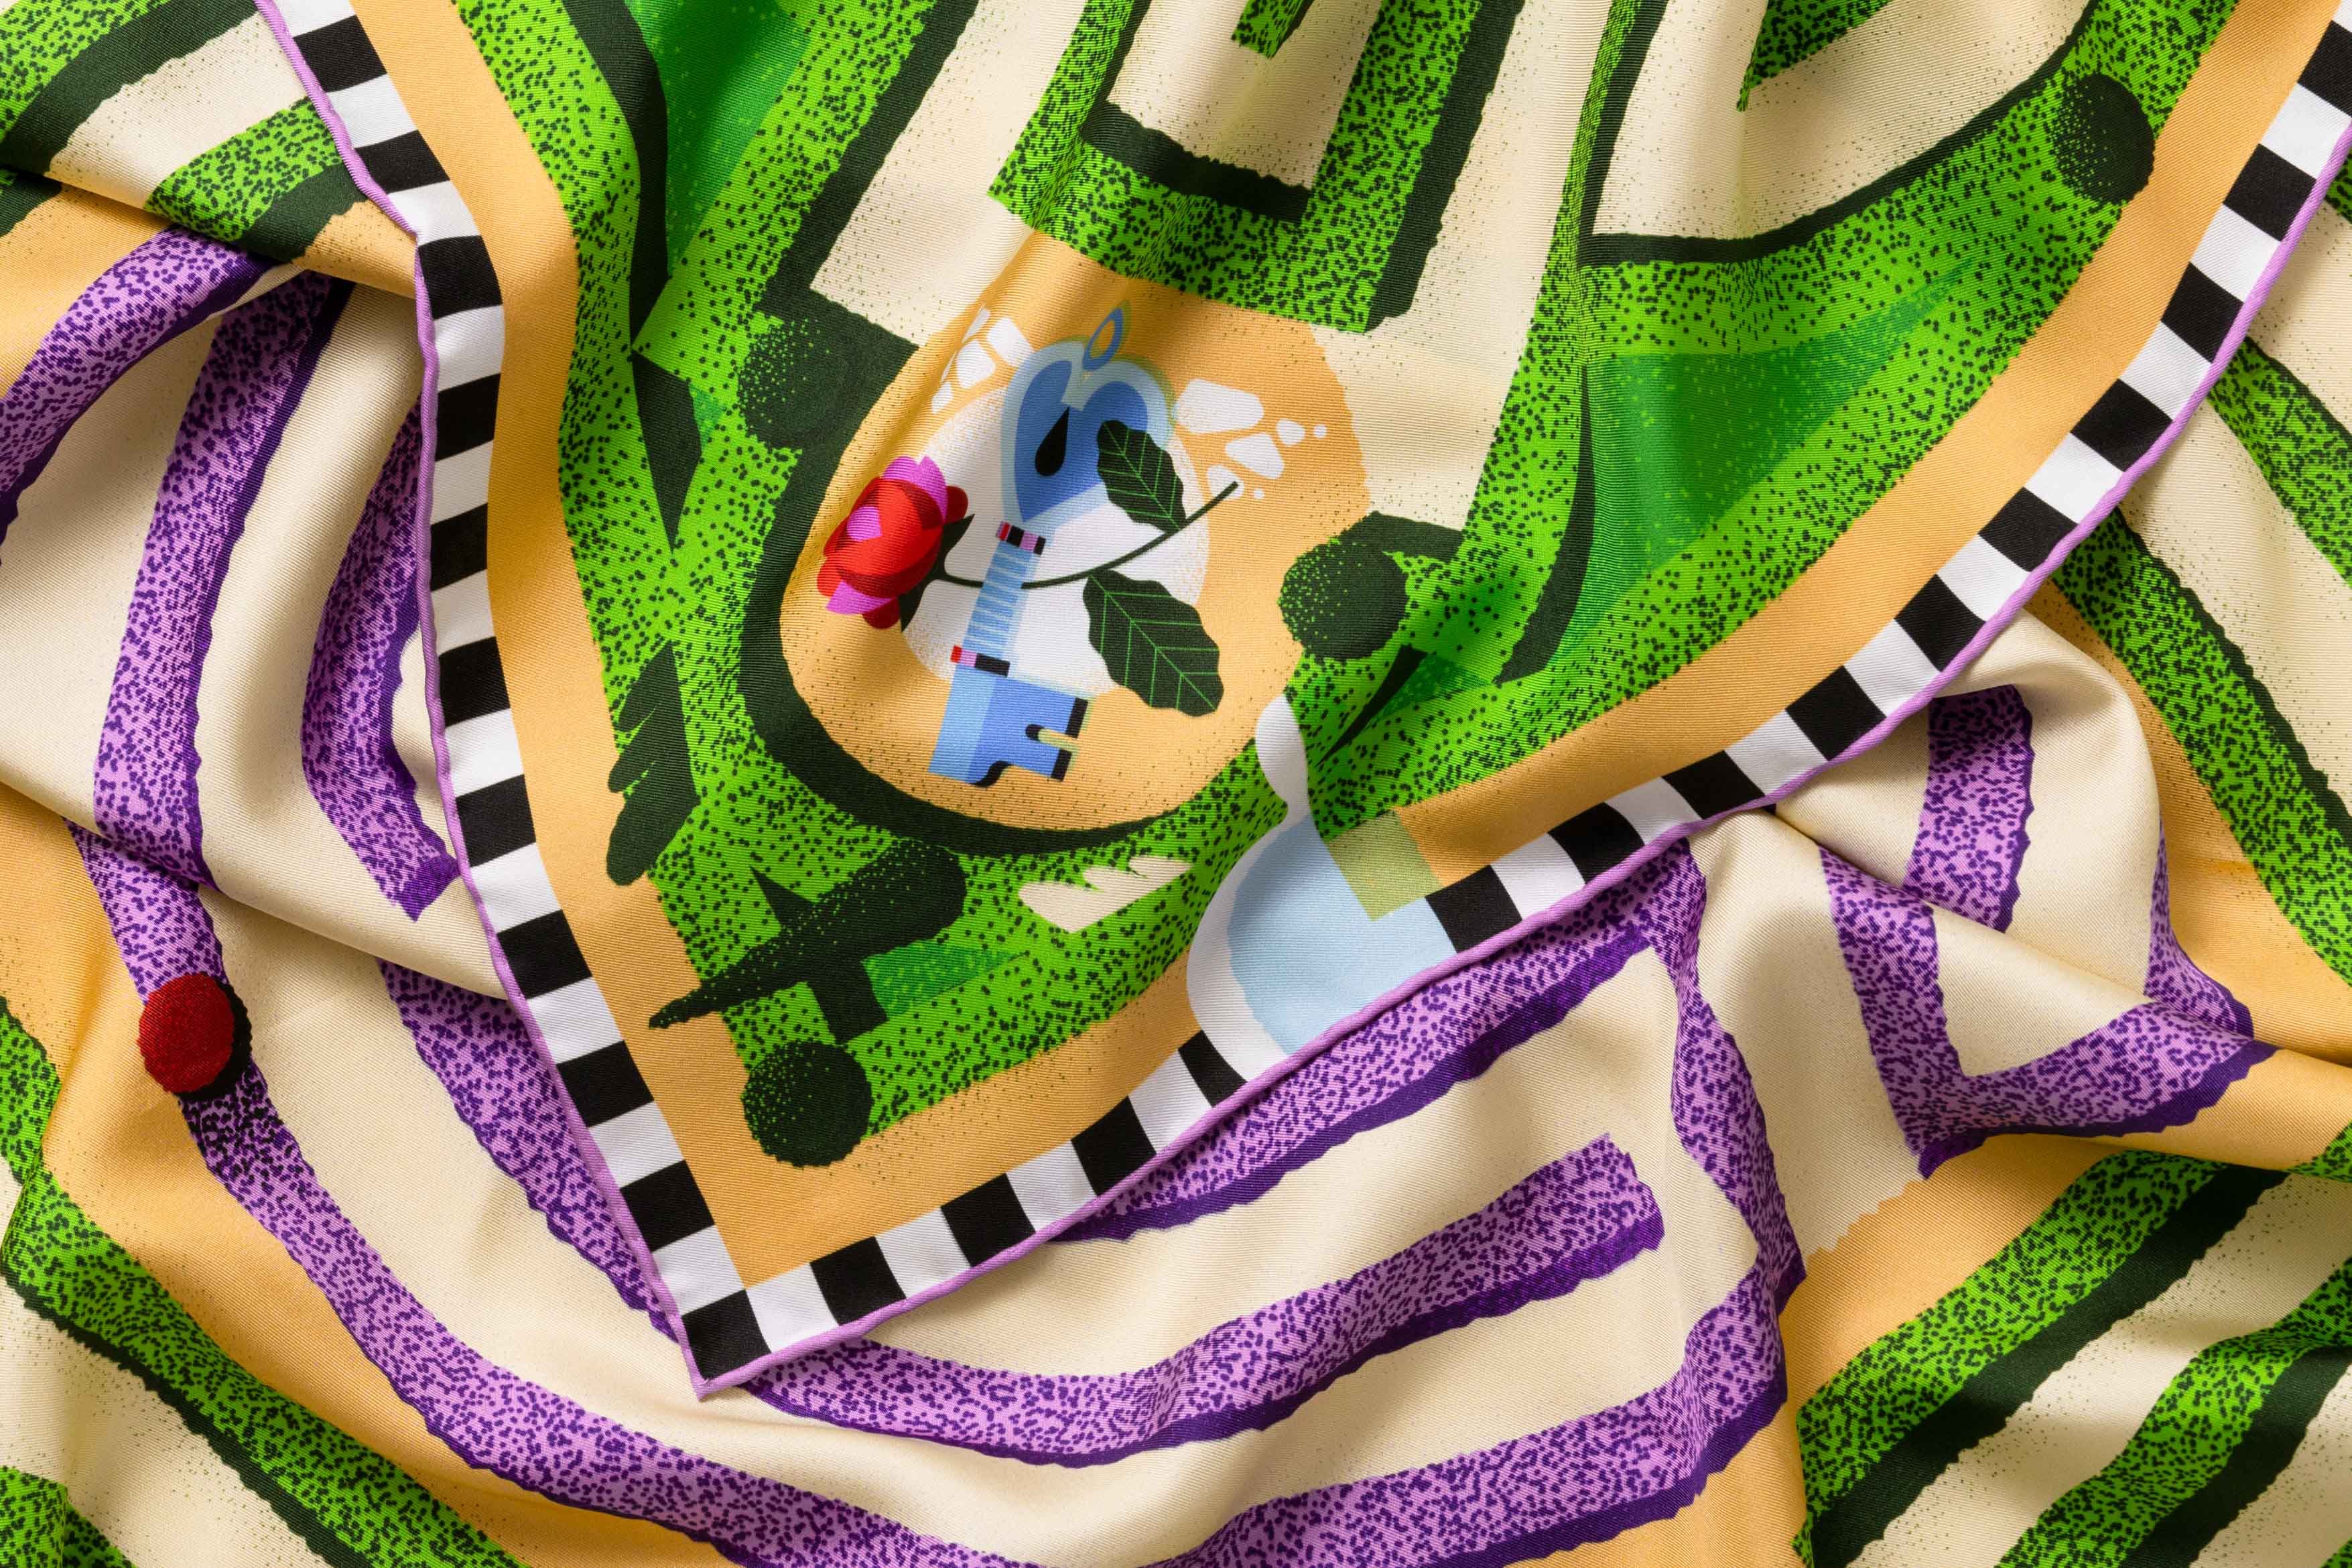 Close-up image of 100% silk square scarf featuring a motif of a garden labyrinth with green hedges and purple lavender elements on a warm cream background. Also features a blue key and floral detail in each of the four corners of the scarf as well as a black and white checker border around the edges. Illustrates the lightly ridged texture of the silk twill along with the rich color tones and luminous nature of the silk scarf.